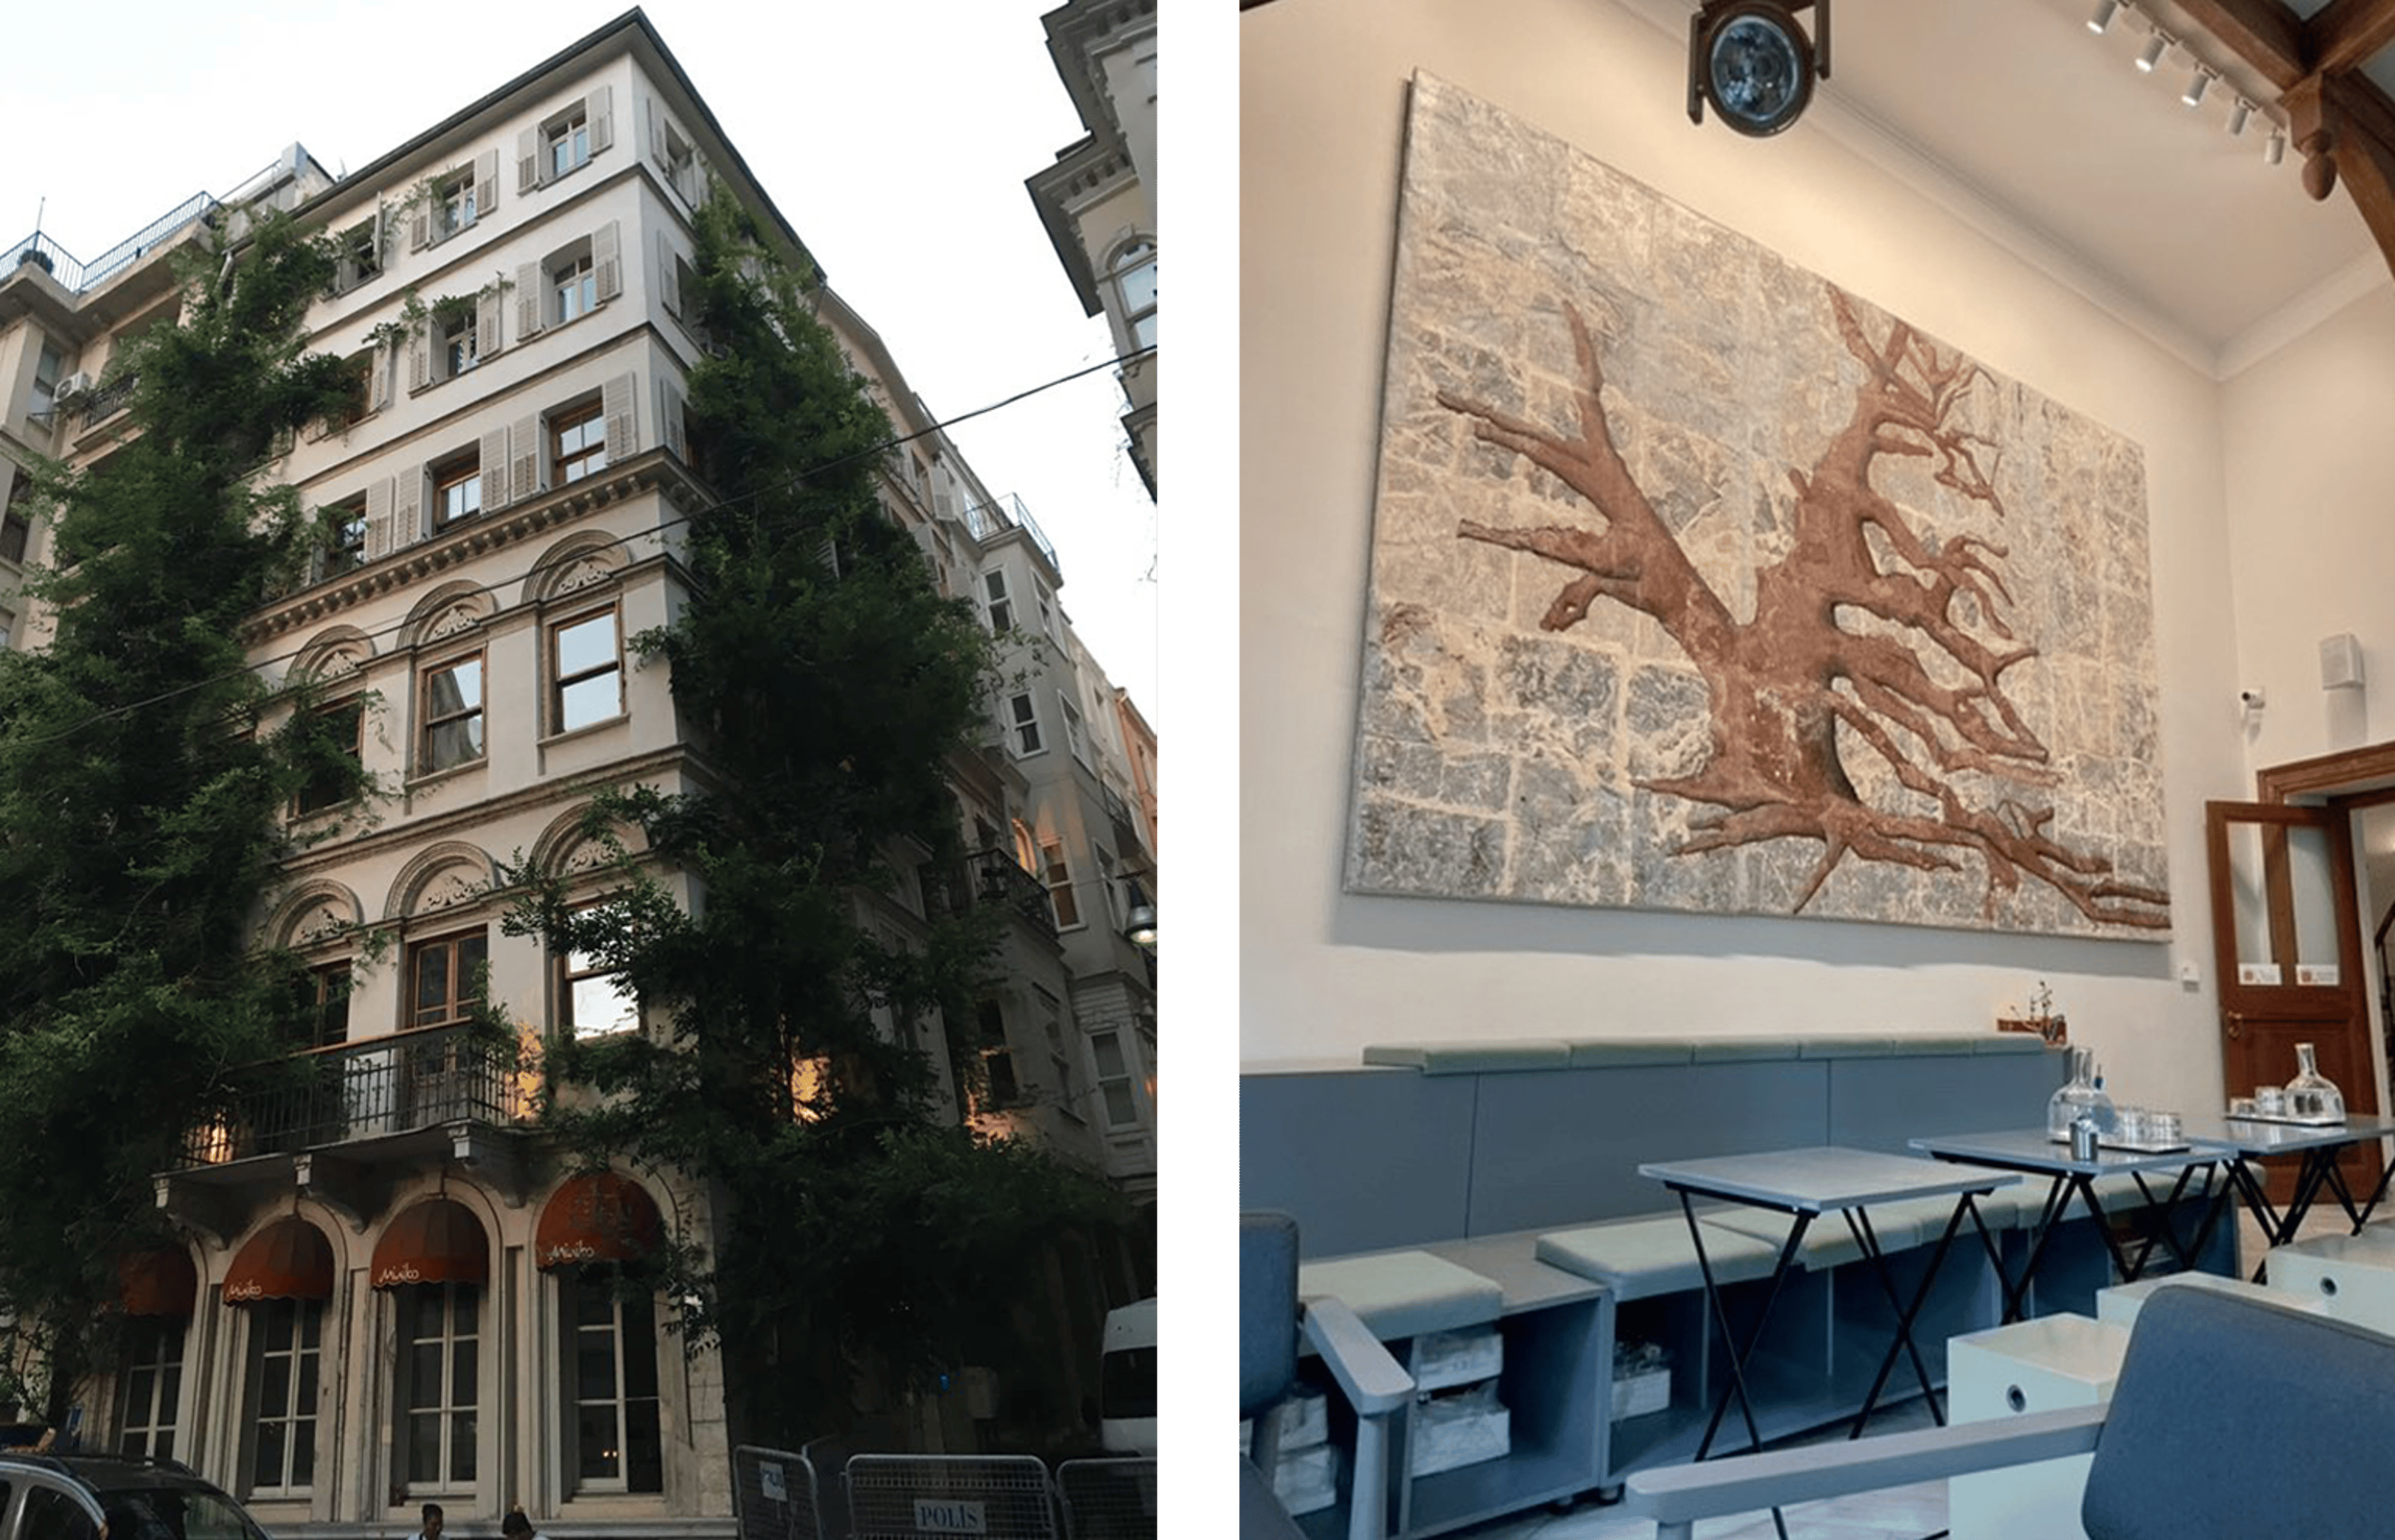 Left image: Facade of Kiraathane Literature House. Beige colored old building covered with ivy. Right image: Interior of Postane. A room with simple gray tables and chairs. A picture of a large tree trunk hangs on the wall.